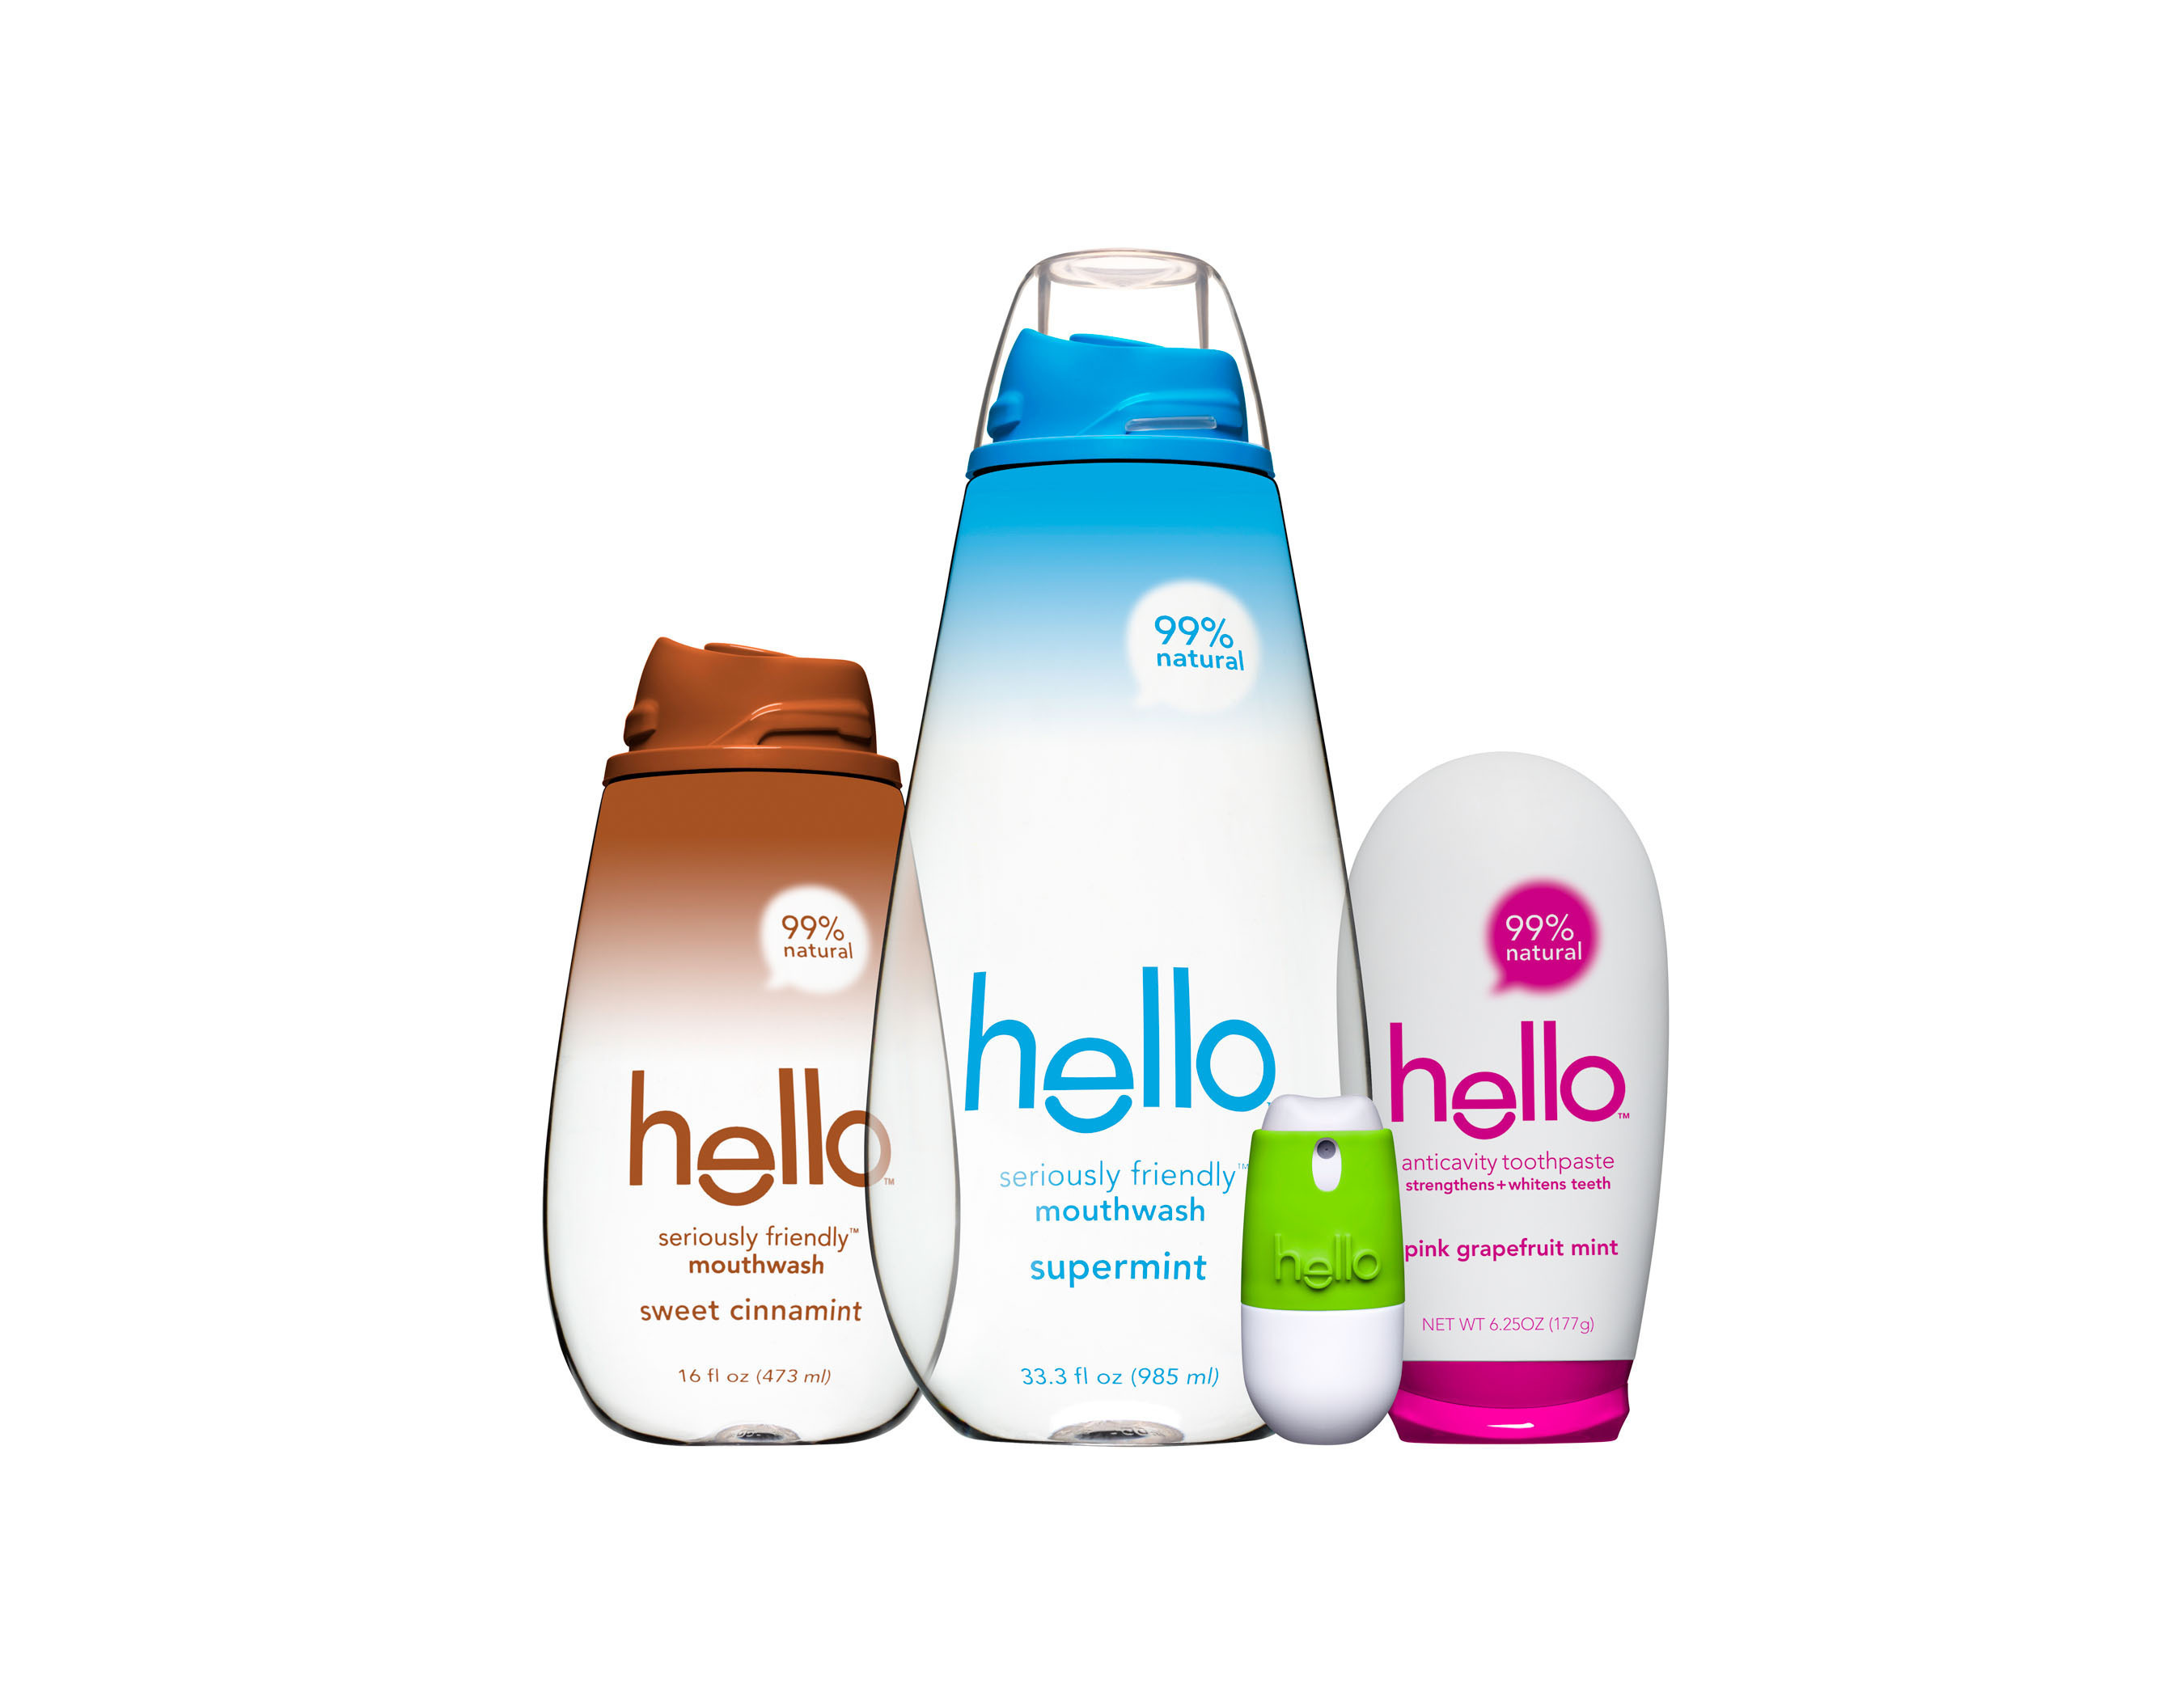 hello(TM), the first-ever seriously friendly(TM) oral care line, greets the world with 99% natural, 100% nice(TM) toothpastes, mouthwashes and breath sprays in distinctive, gorgeous designs created by BMW Group DesignworksUSA. hello promises a friendly mouth, and features products with no harsh chemicals, artificial colors, alcohol or pain, in four delectable flavors: Supermint, Pink Grapefruit Mint, Mojito Mint and Sweet Cinnamint. Available nationwide in Walgreens and Duane Reade stores, with additional retailers to follow. Visit www.hello-products.com for more information. (PRNewsFoto/Hello Products LLC) (PRNewsFoto/HELLO PRODUCTS LLC)